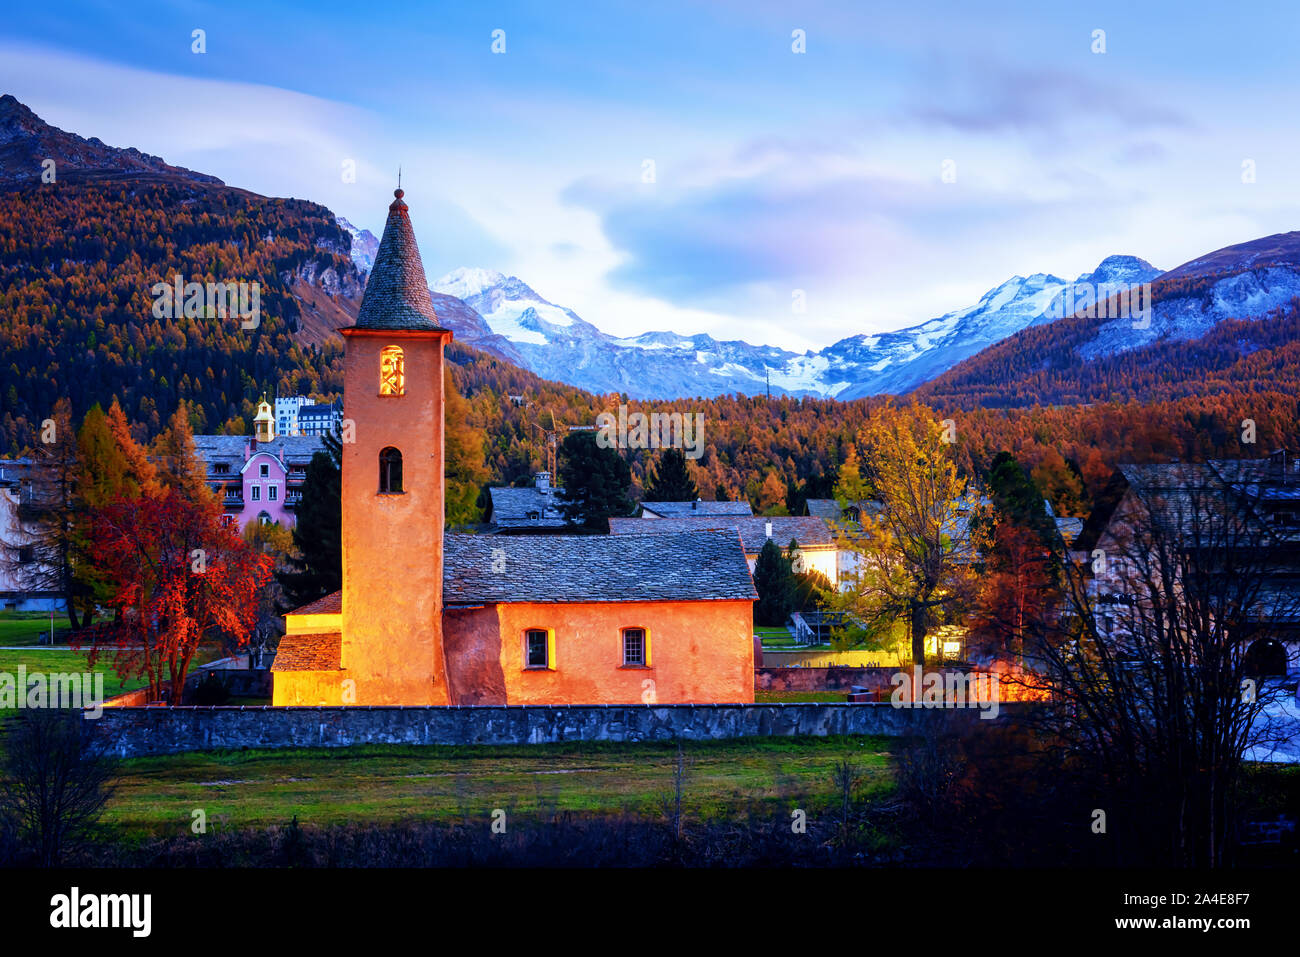 Old christianity church in Sils village (near lake Sils) in Swiss Alps. Red light on building and snowy mountains on background. Switzerland, Maloja region, Upper Engadine. Landscape photography Stock Photo